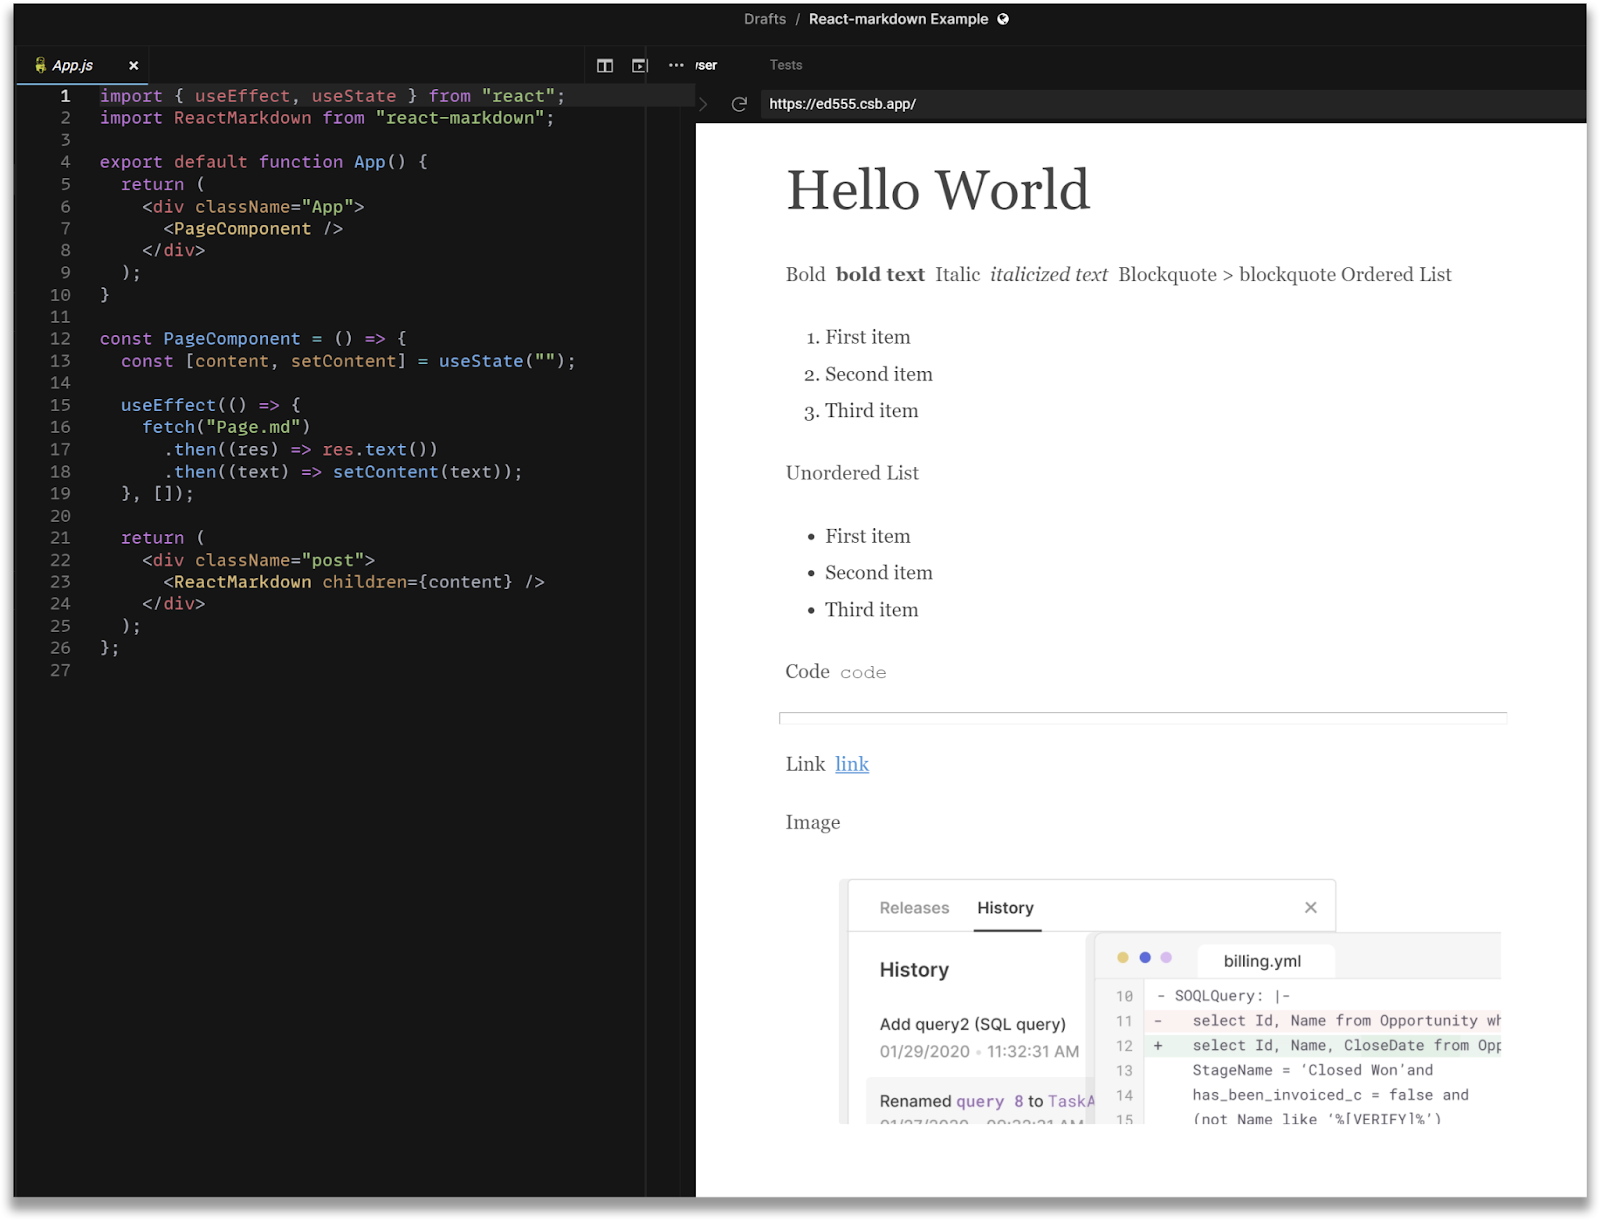 screenshot of react-markdown in action